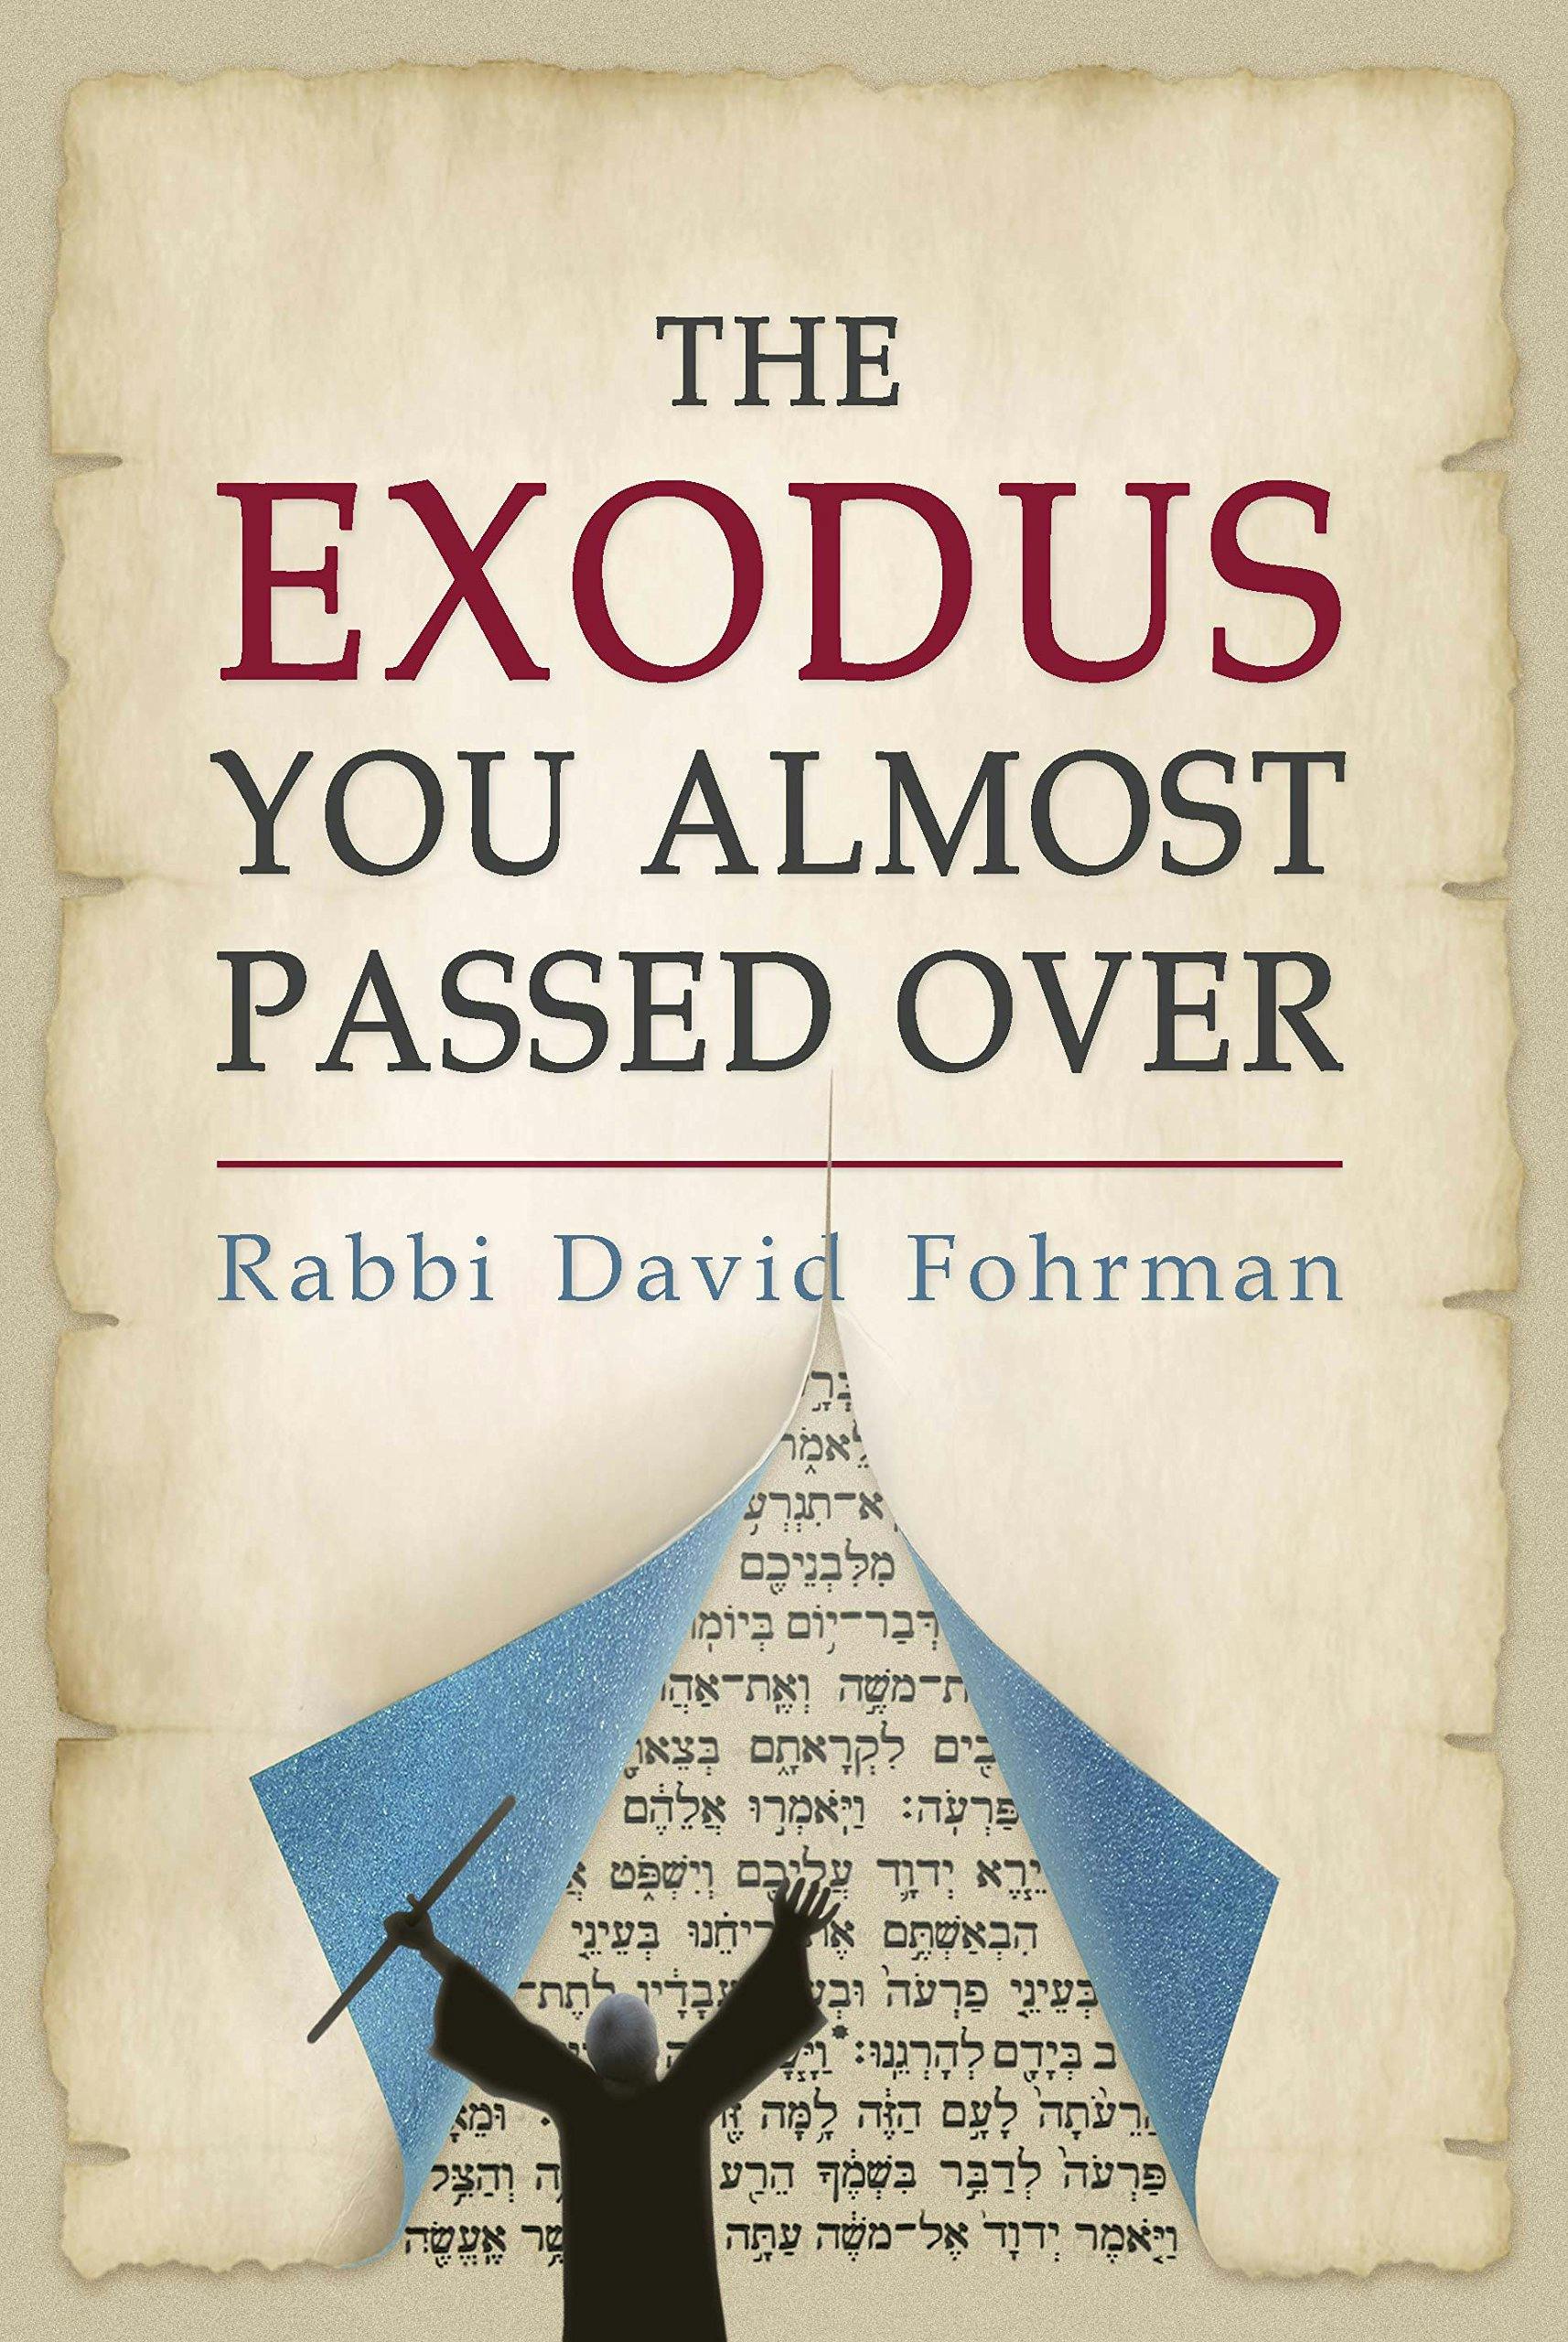 Questions about passover